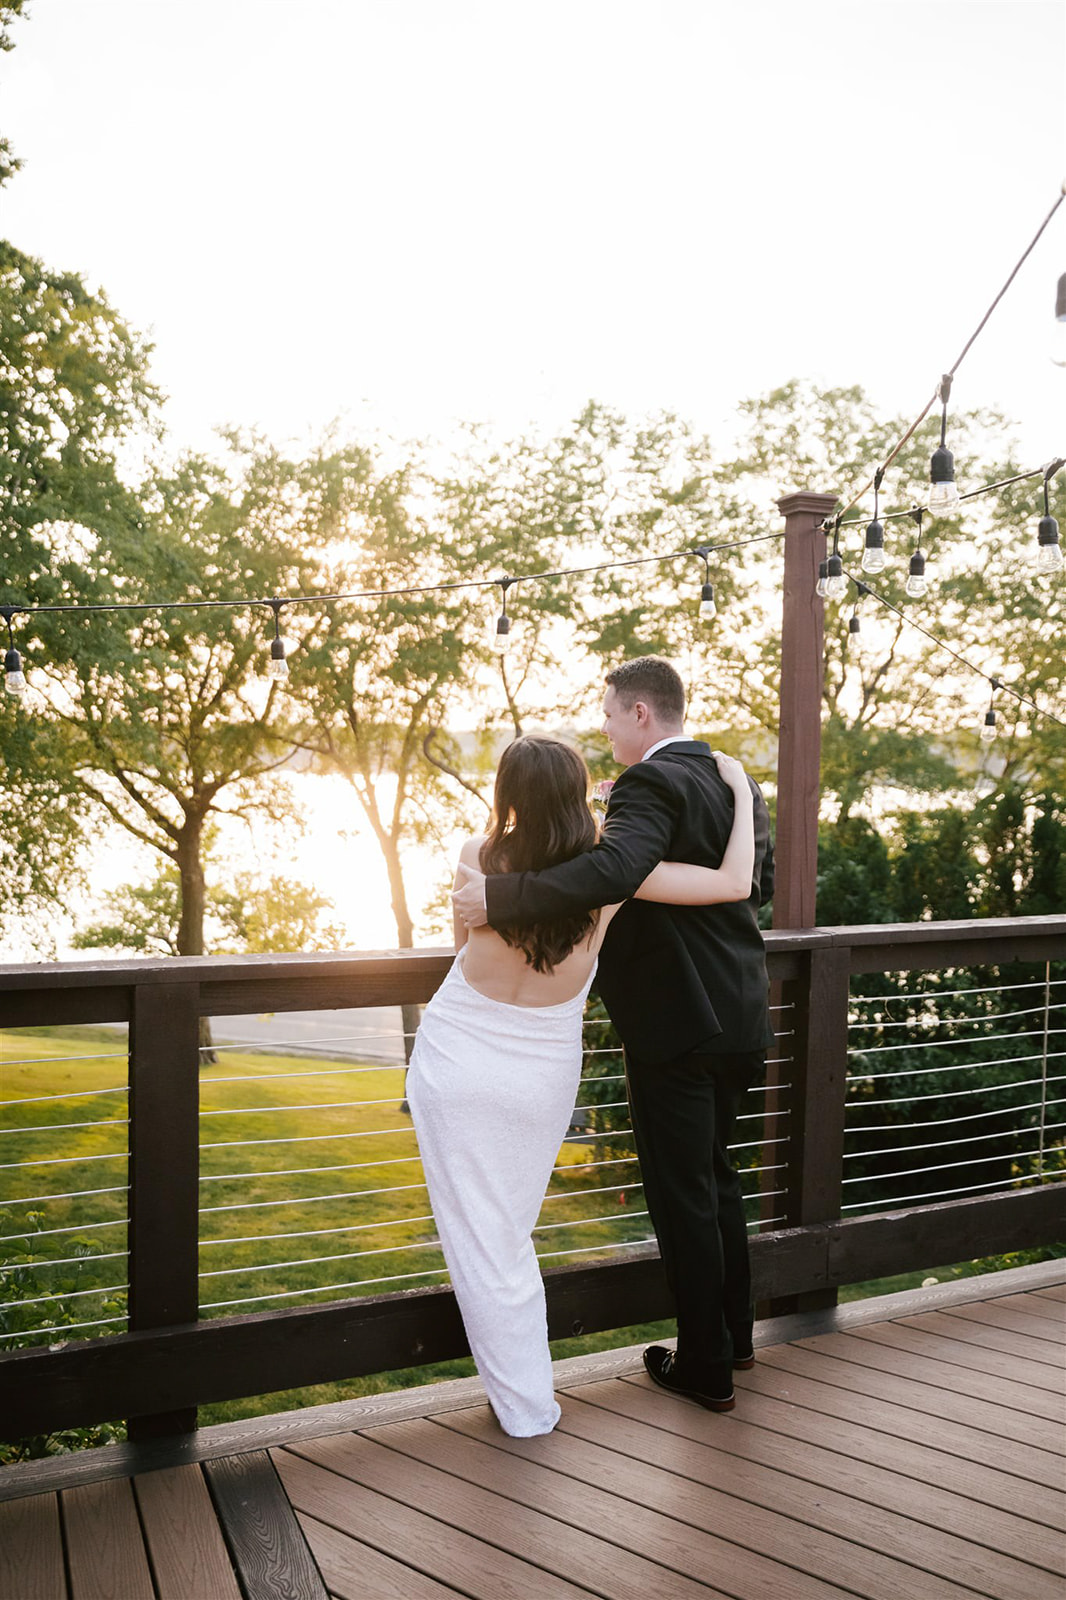 The breathtaking moment of the bride's dress change, illuminated by the golden hues of the sunset.